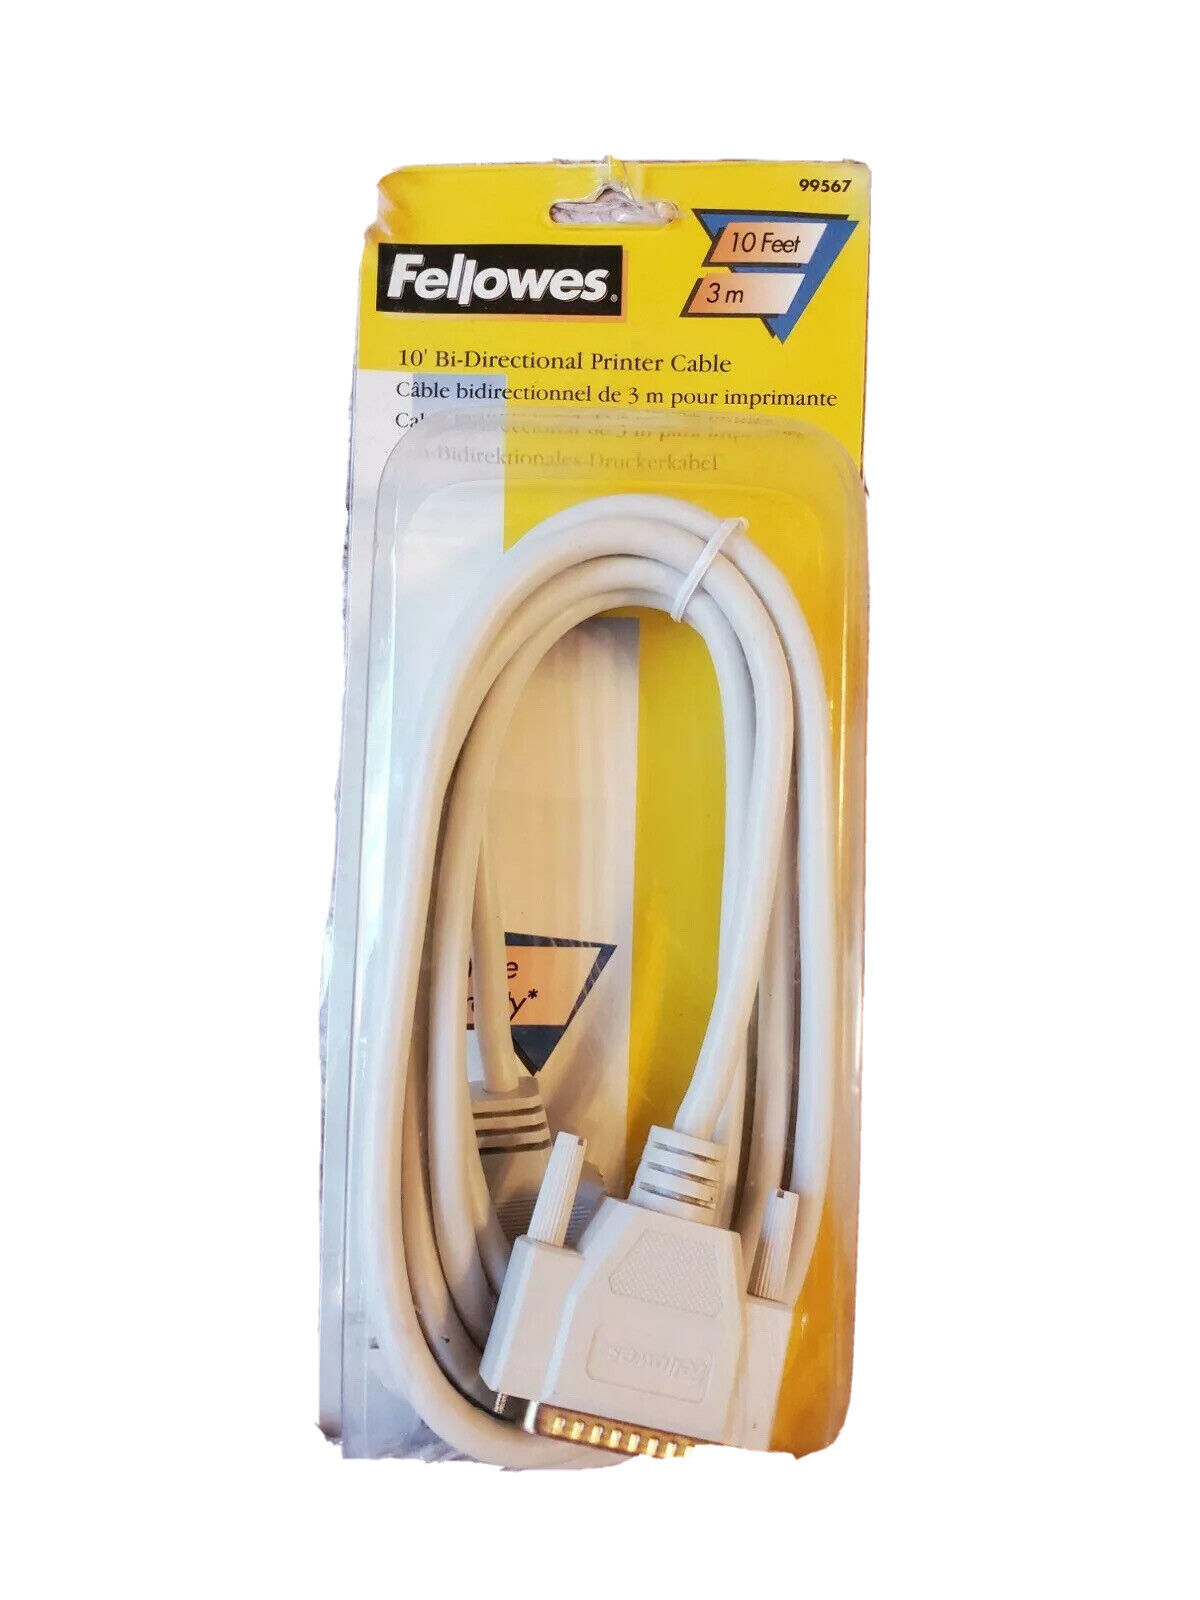 Fellowes 10 Foot Printer Cable - Bi Directional, 2 Way Computer Accessory NEW